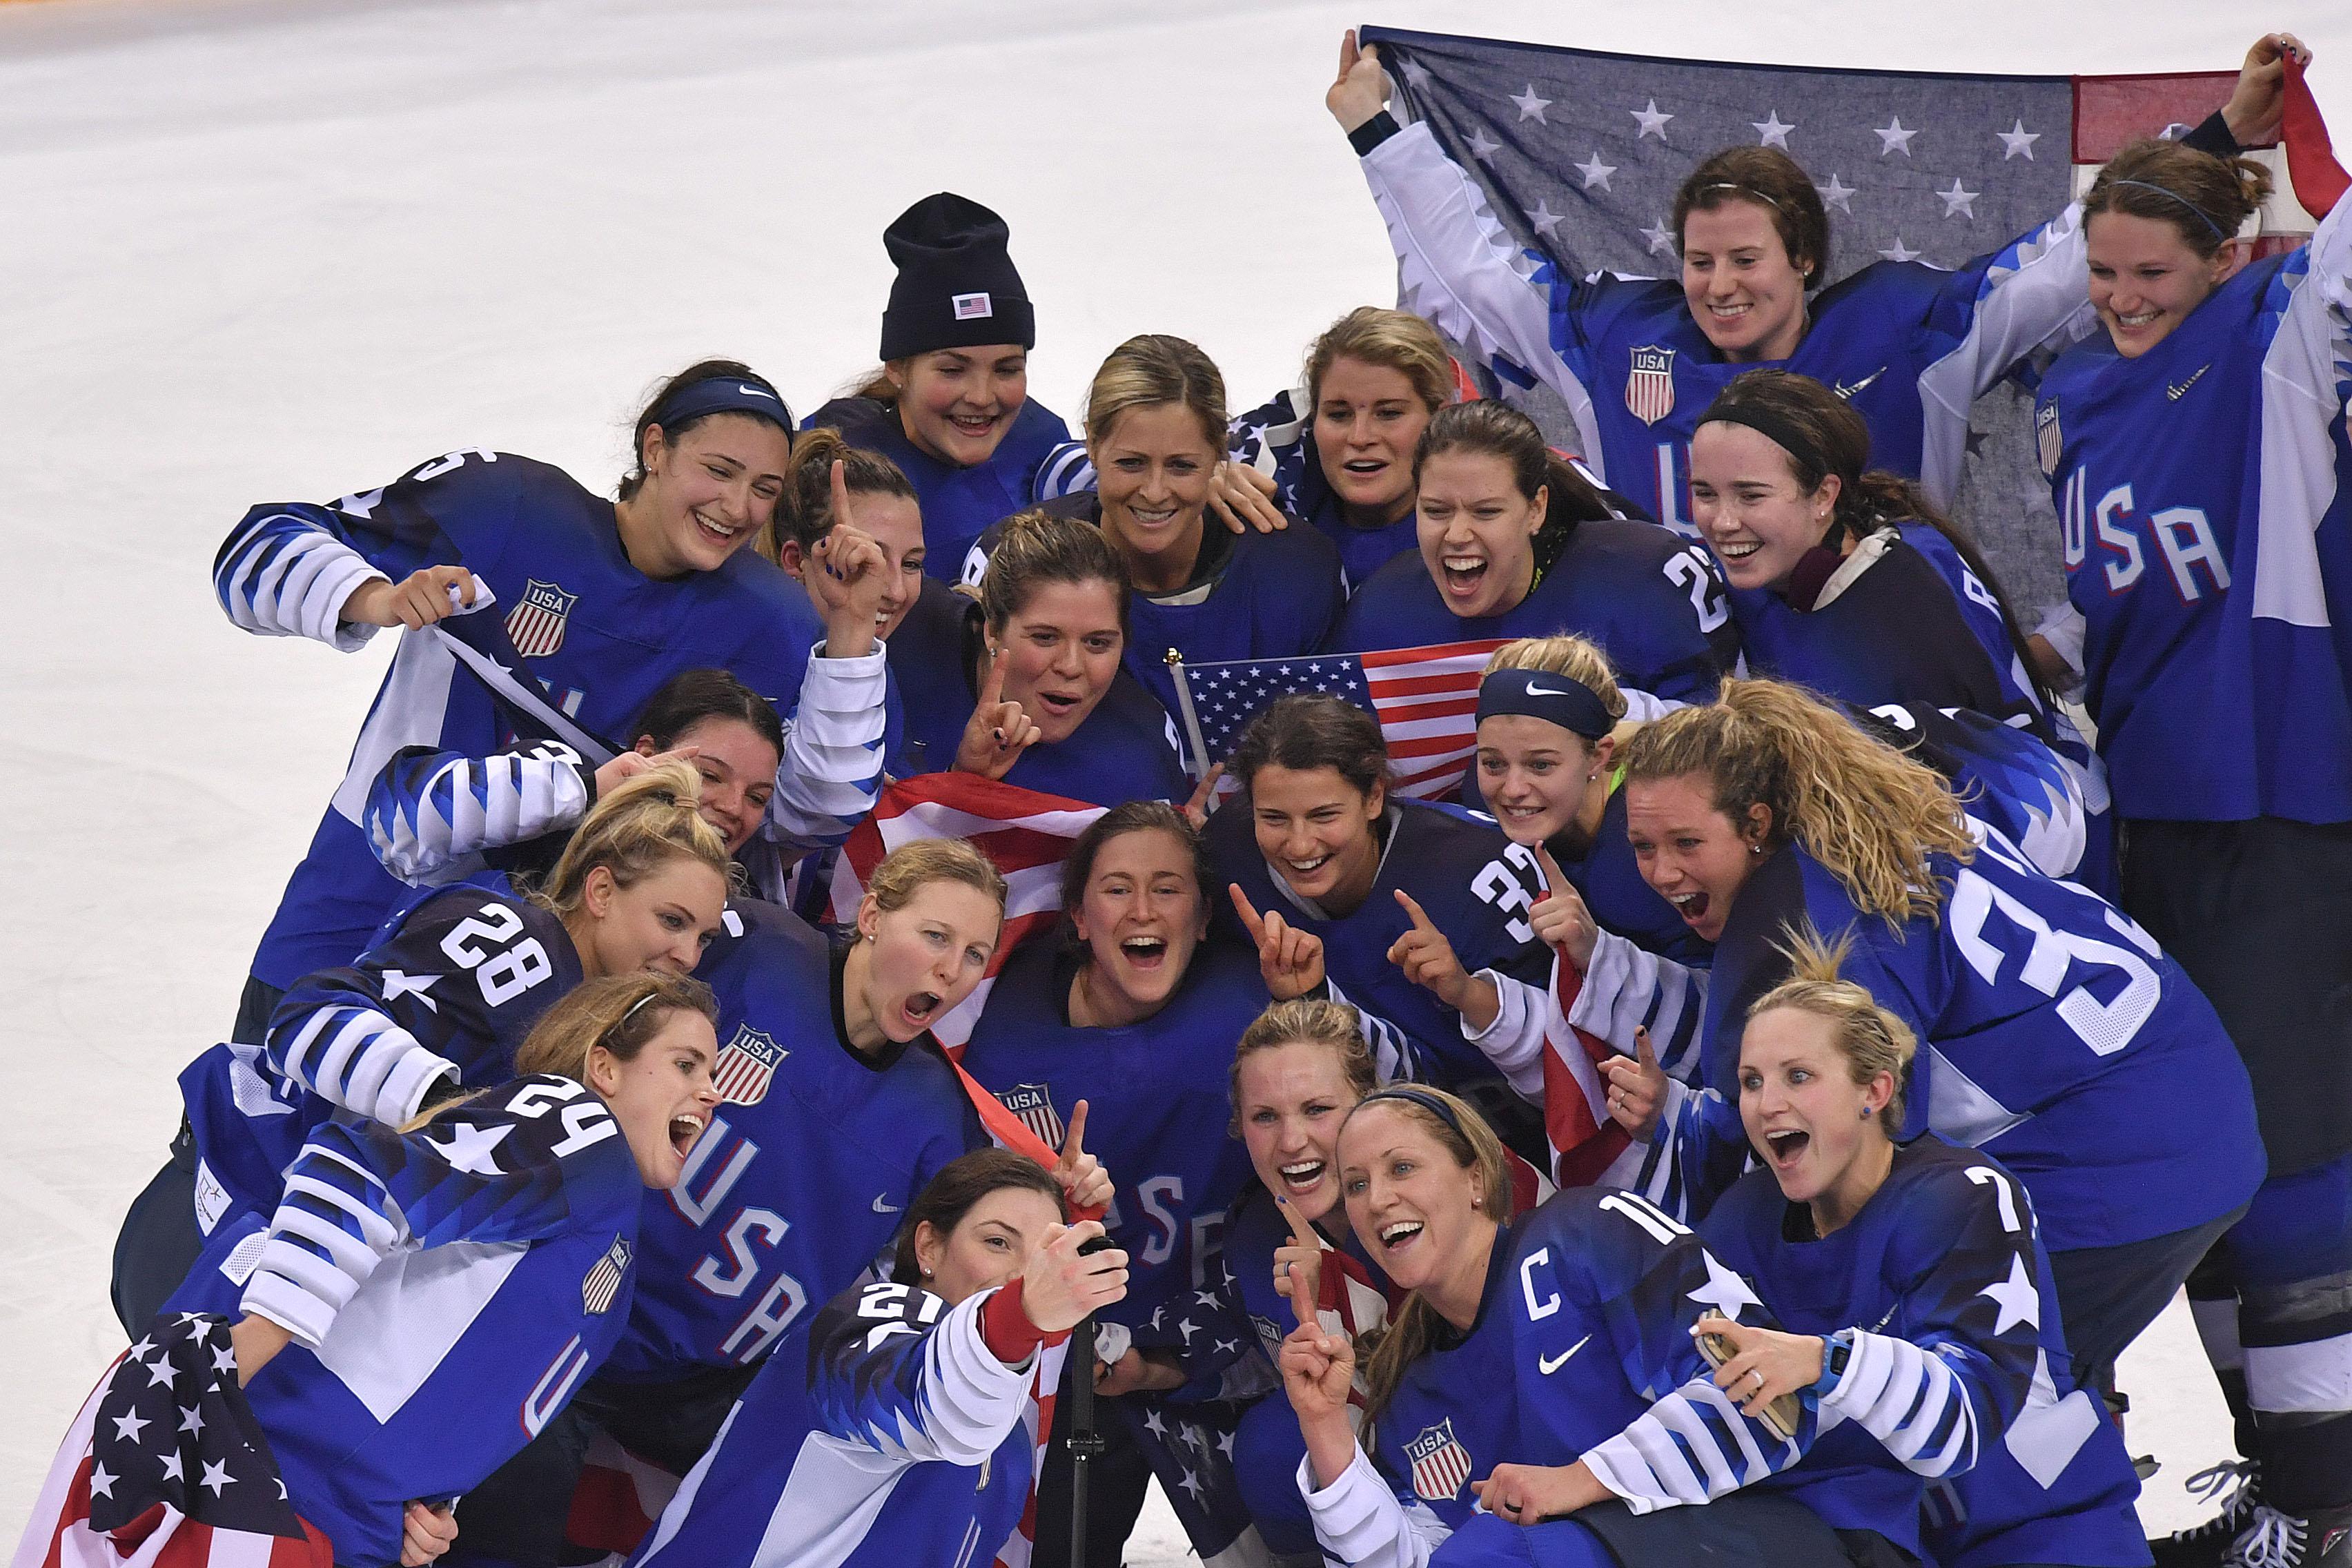 TOPSHOT - USA's Hilary Knight (21) takes a selfie with her team as they celebrate their win after a penalty shootout in the women's gold medal ice hockey match between Canada and the US during the Pyeongchang 2018 Winter Olympic Games at the Gangneung Hockey Centre in Gangneung on February 22, 2018.  / AFP PHOTO / Ed JONES        (Photo credit should read ED JONES/AFP/Getty Images)